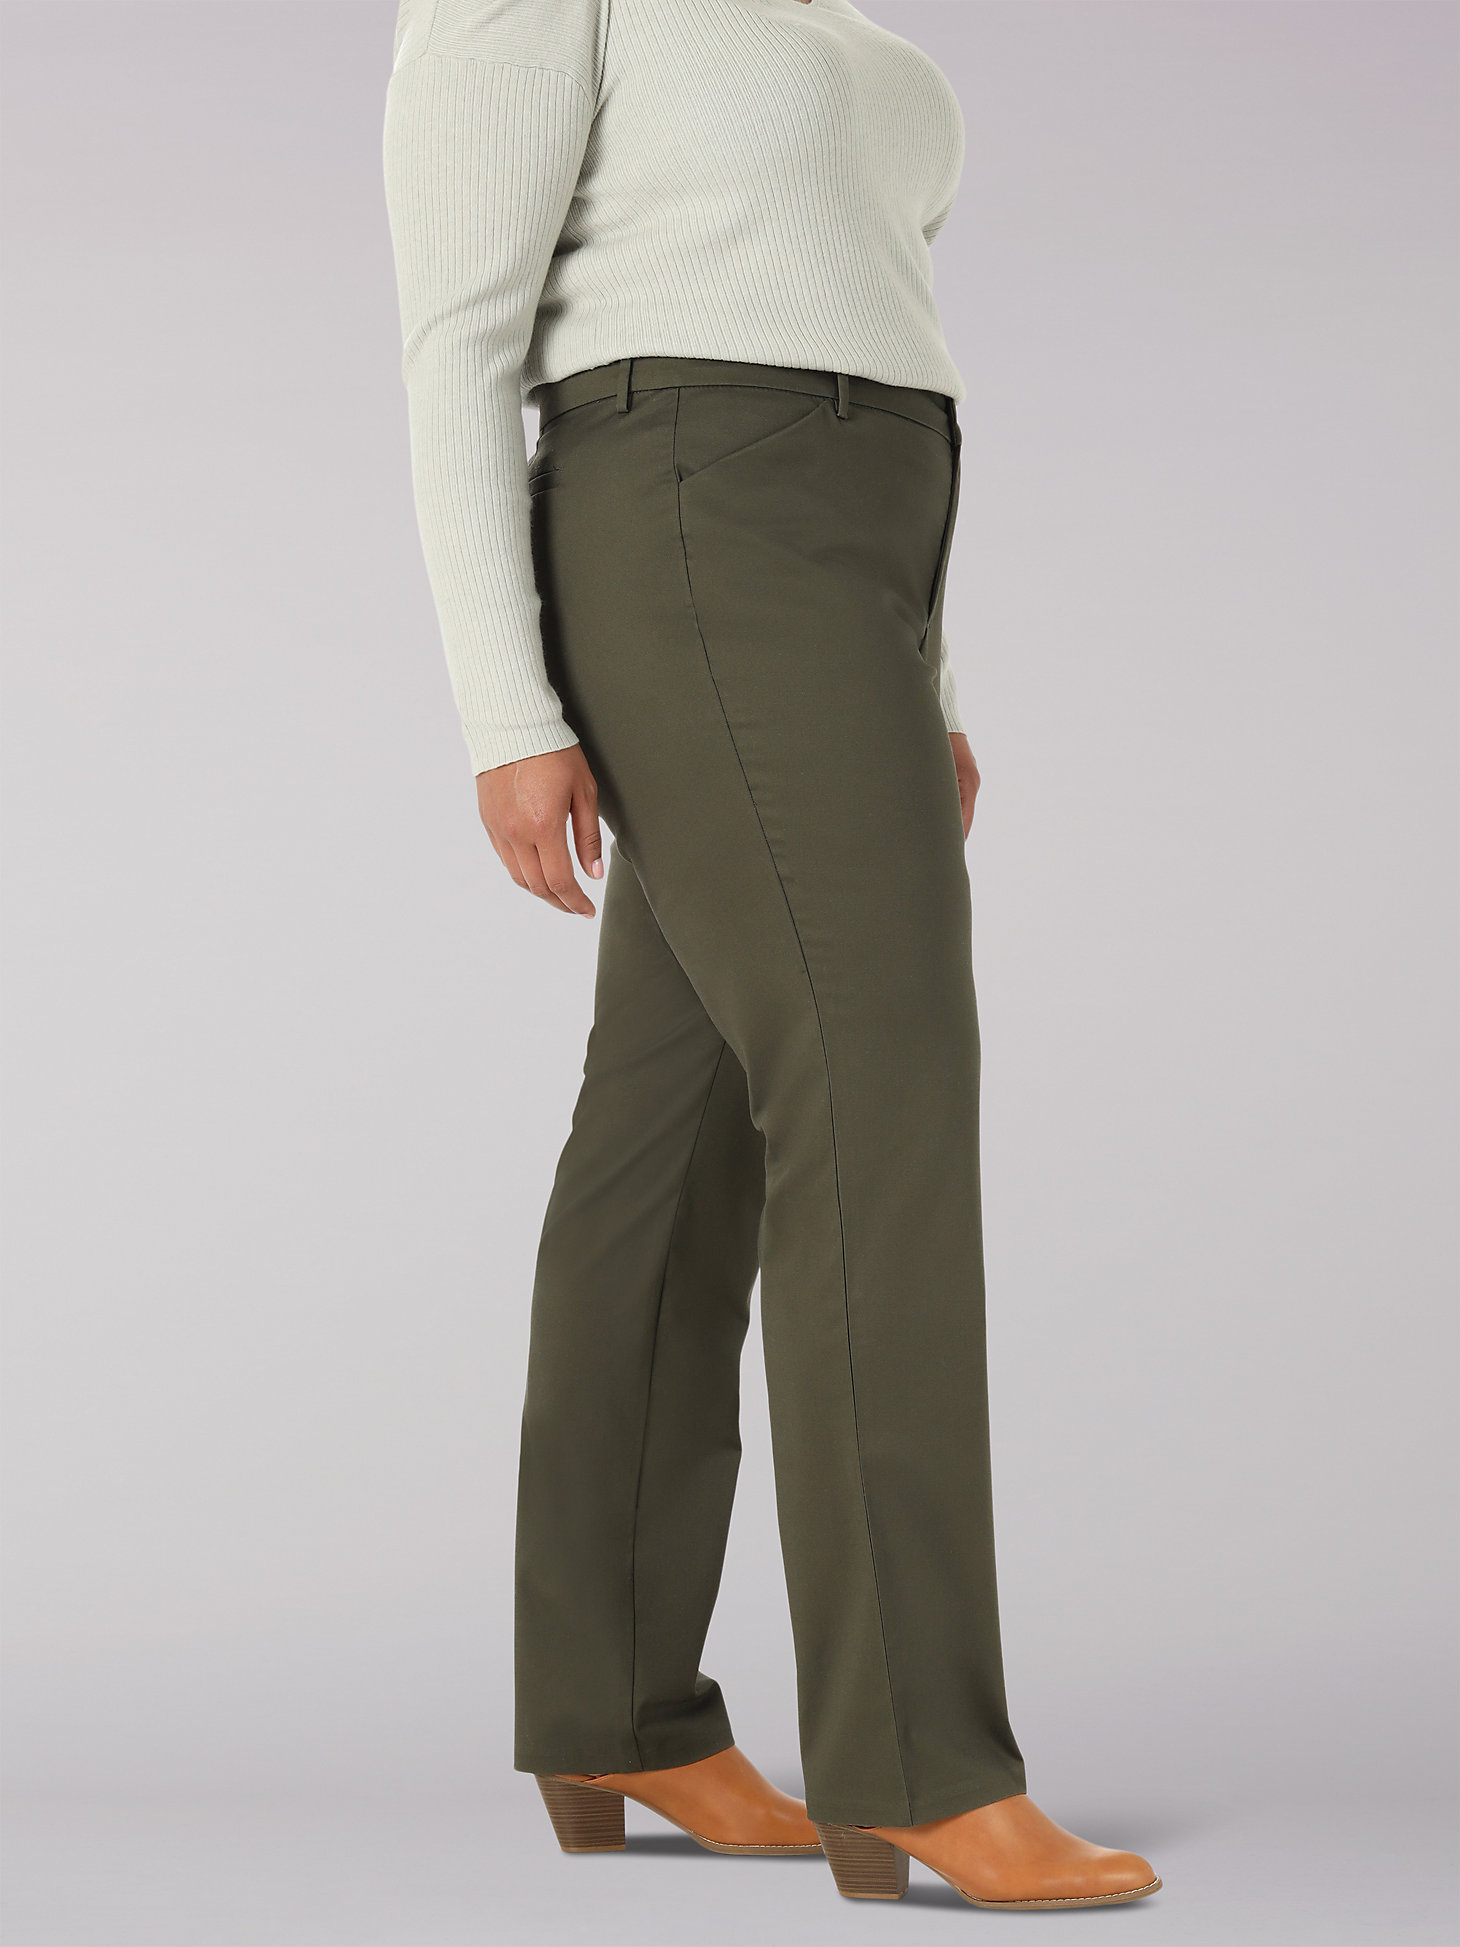 Women's Wrinkle Free Relaxed Fit Straight Leg Pant (Plus) in Frontier Olive alternative view 2